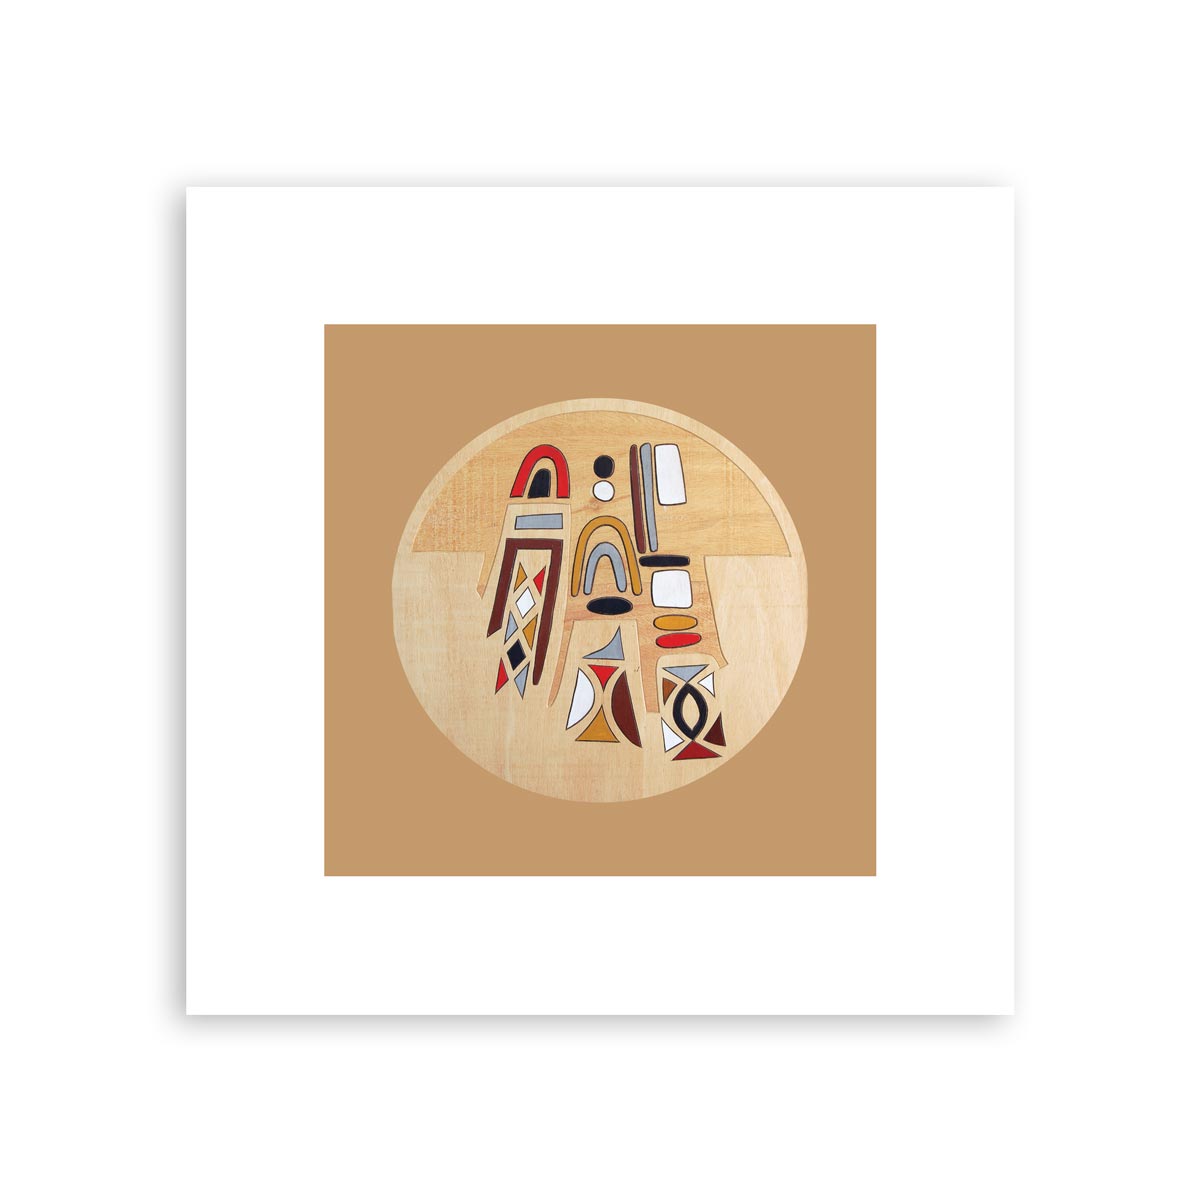 We – abstract art print in earth tones